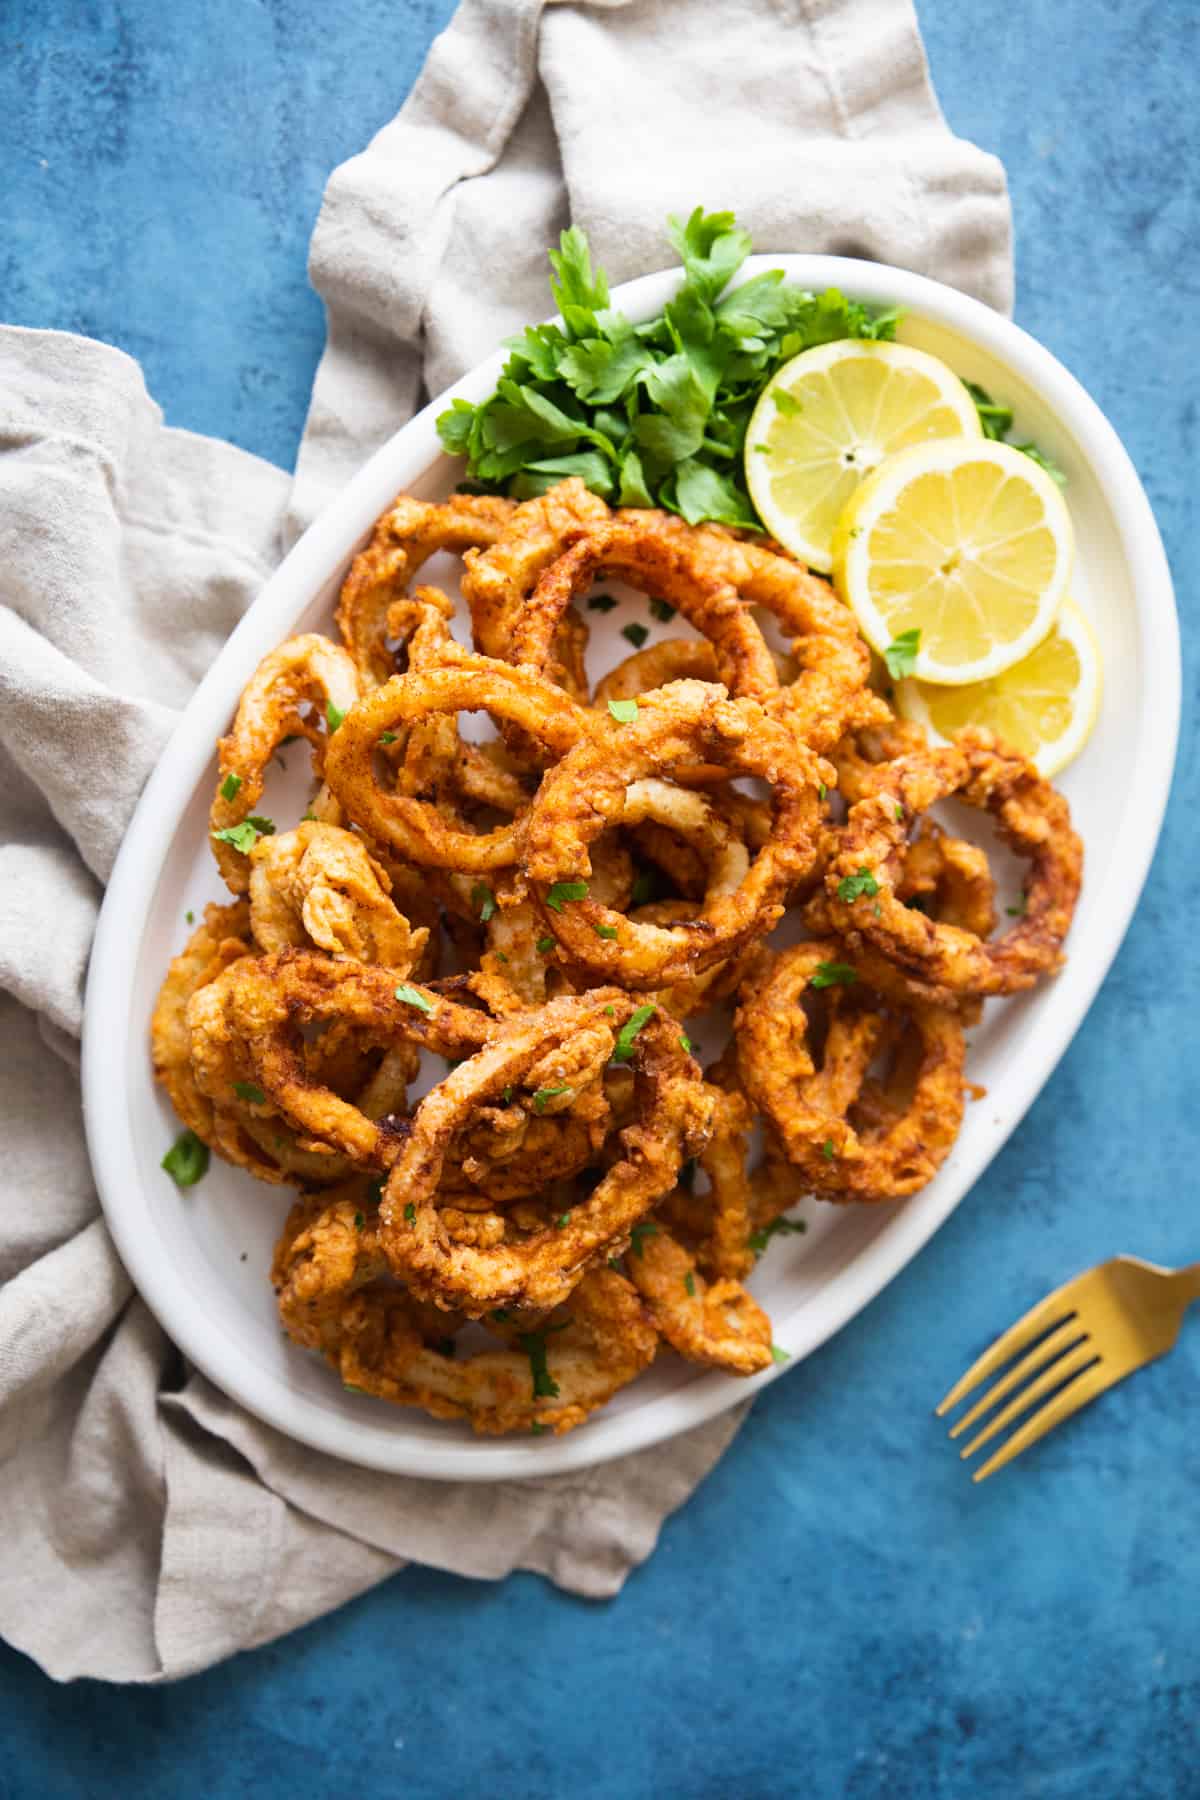 This easy fried calamari recipe will be your favorite. Calamari rings are soaked in milk to tenderize, coated in spiced flour and fried until crispy on the outside and tender on the inside. Perfection in every bite! 